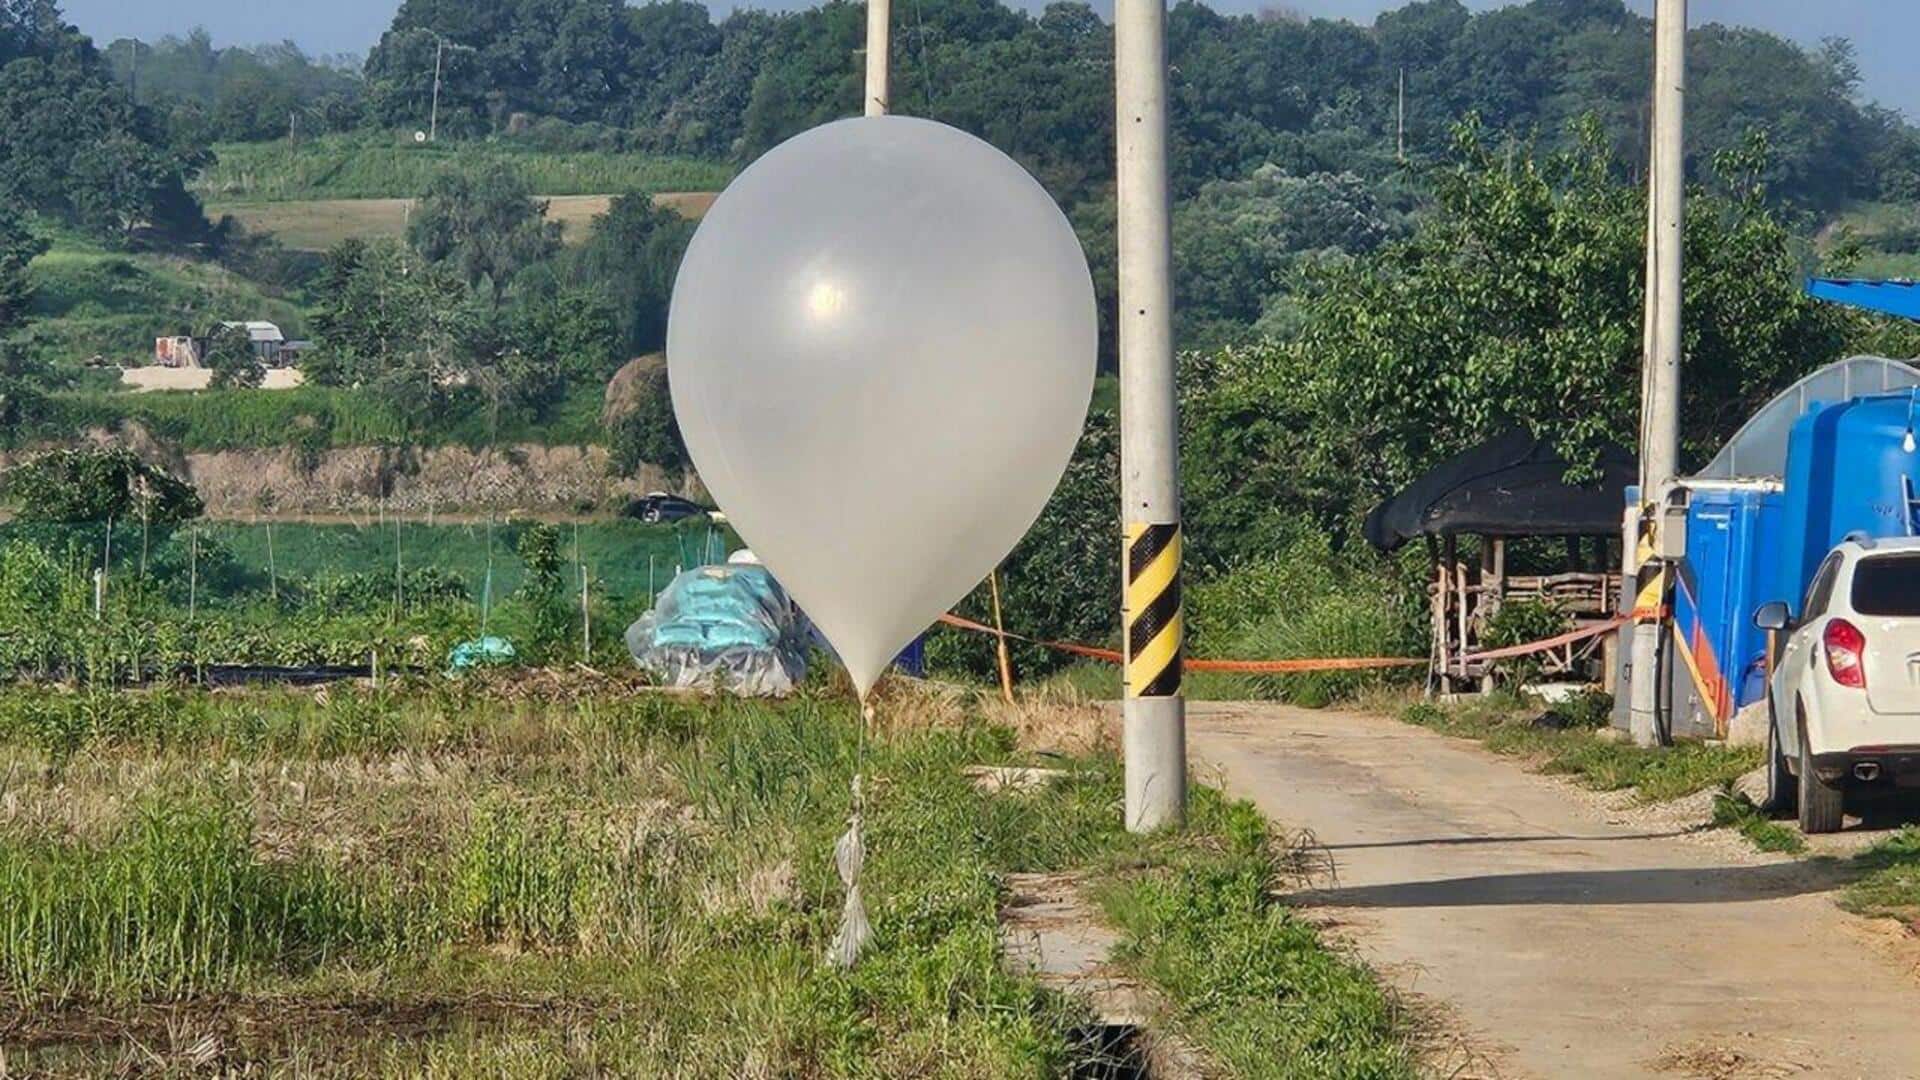 North Korea dumps trash-filled balloons on the South